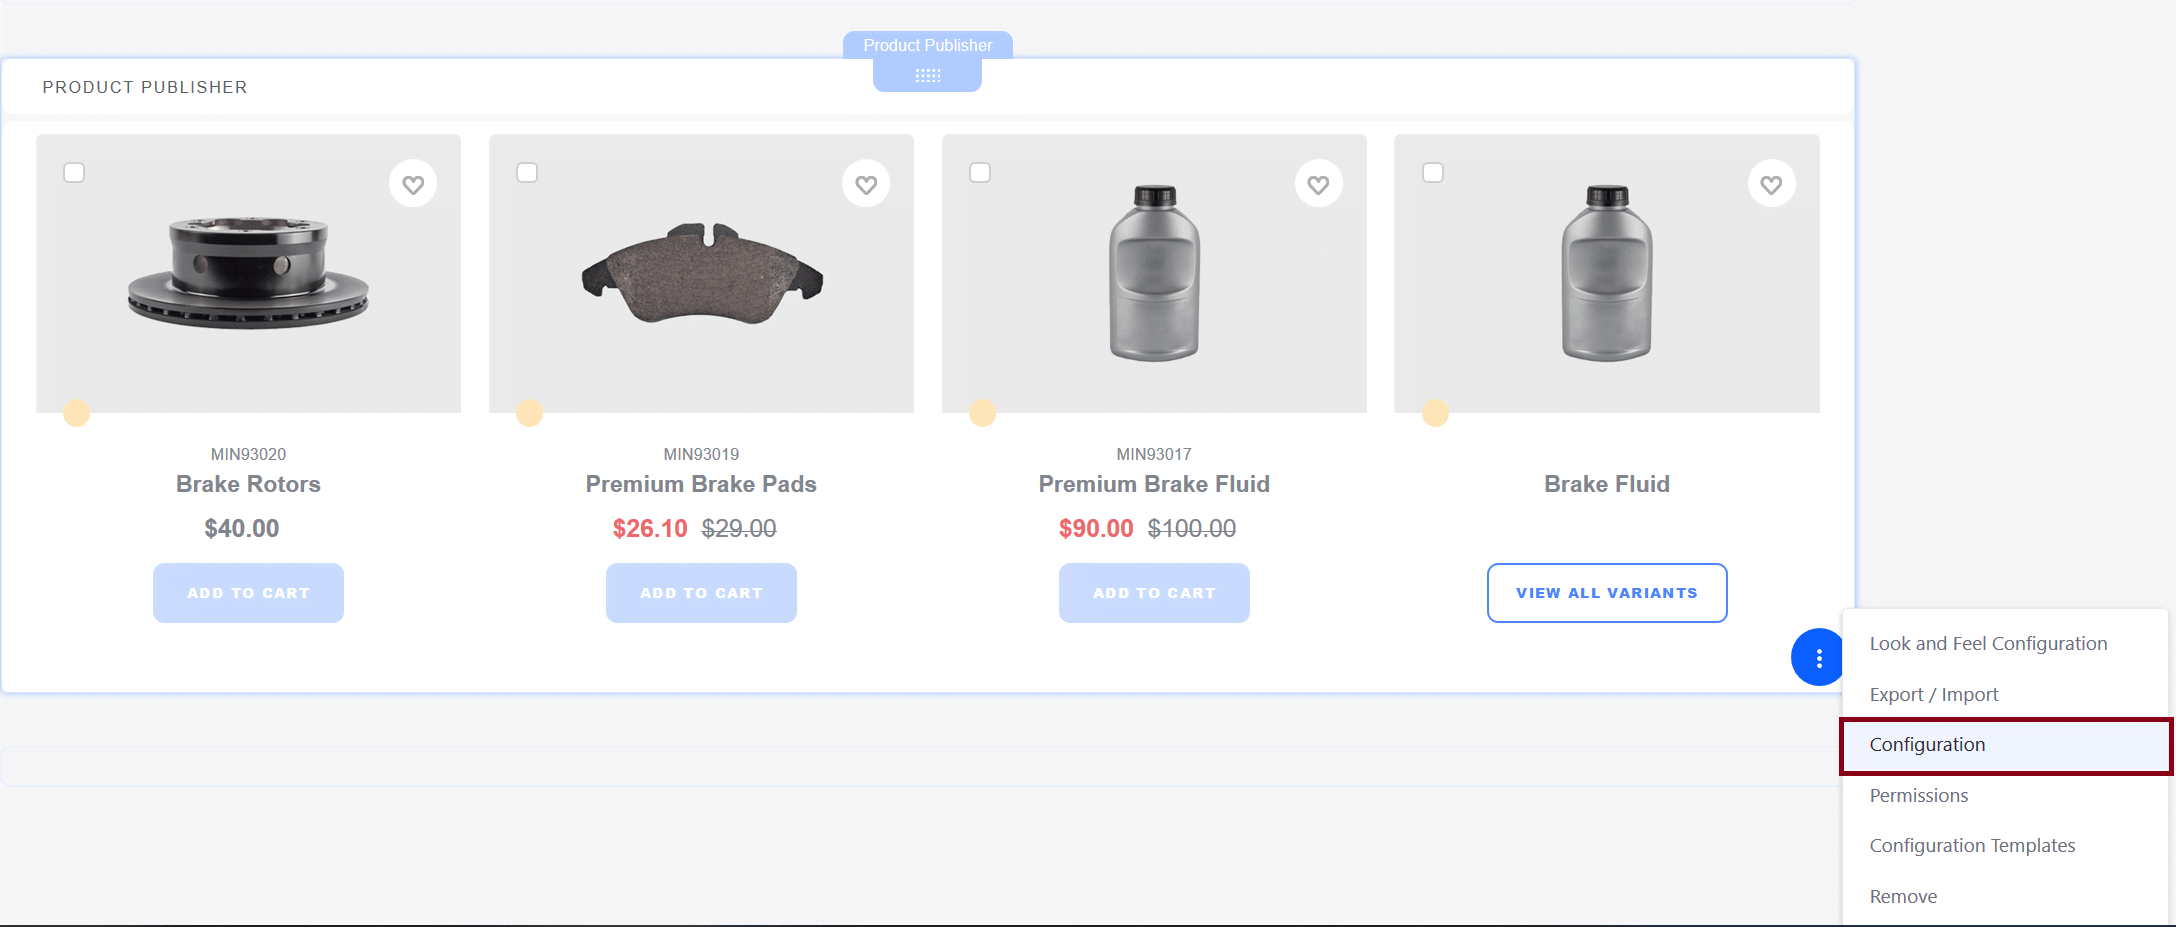 Open the configuration menu for the product publisher widget.